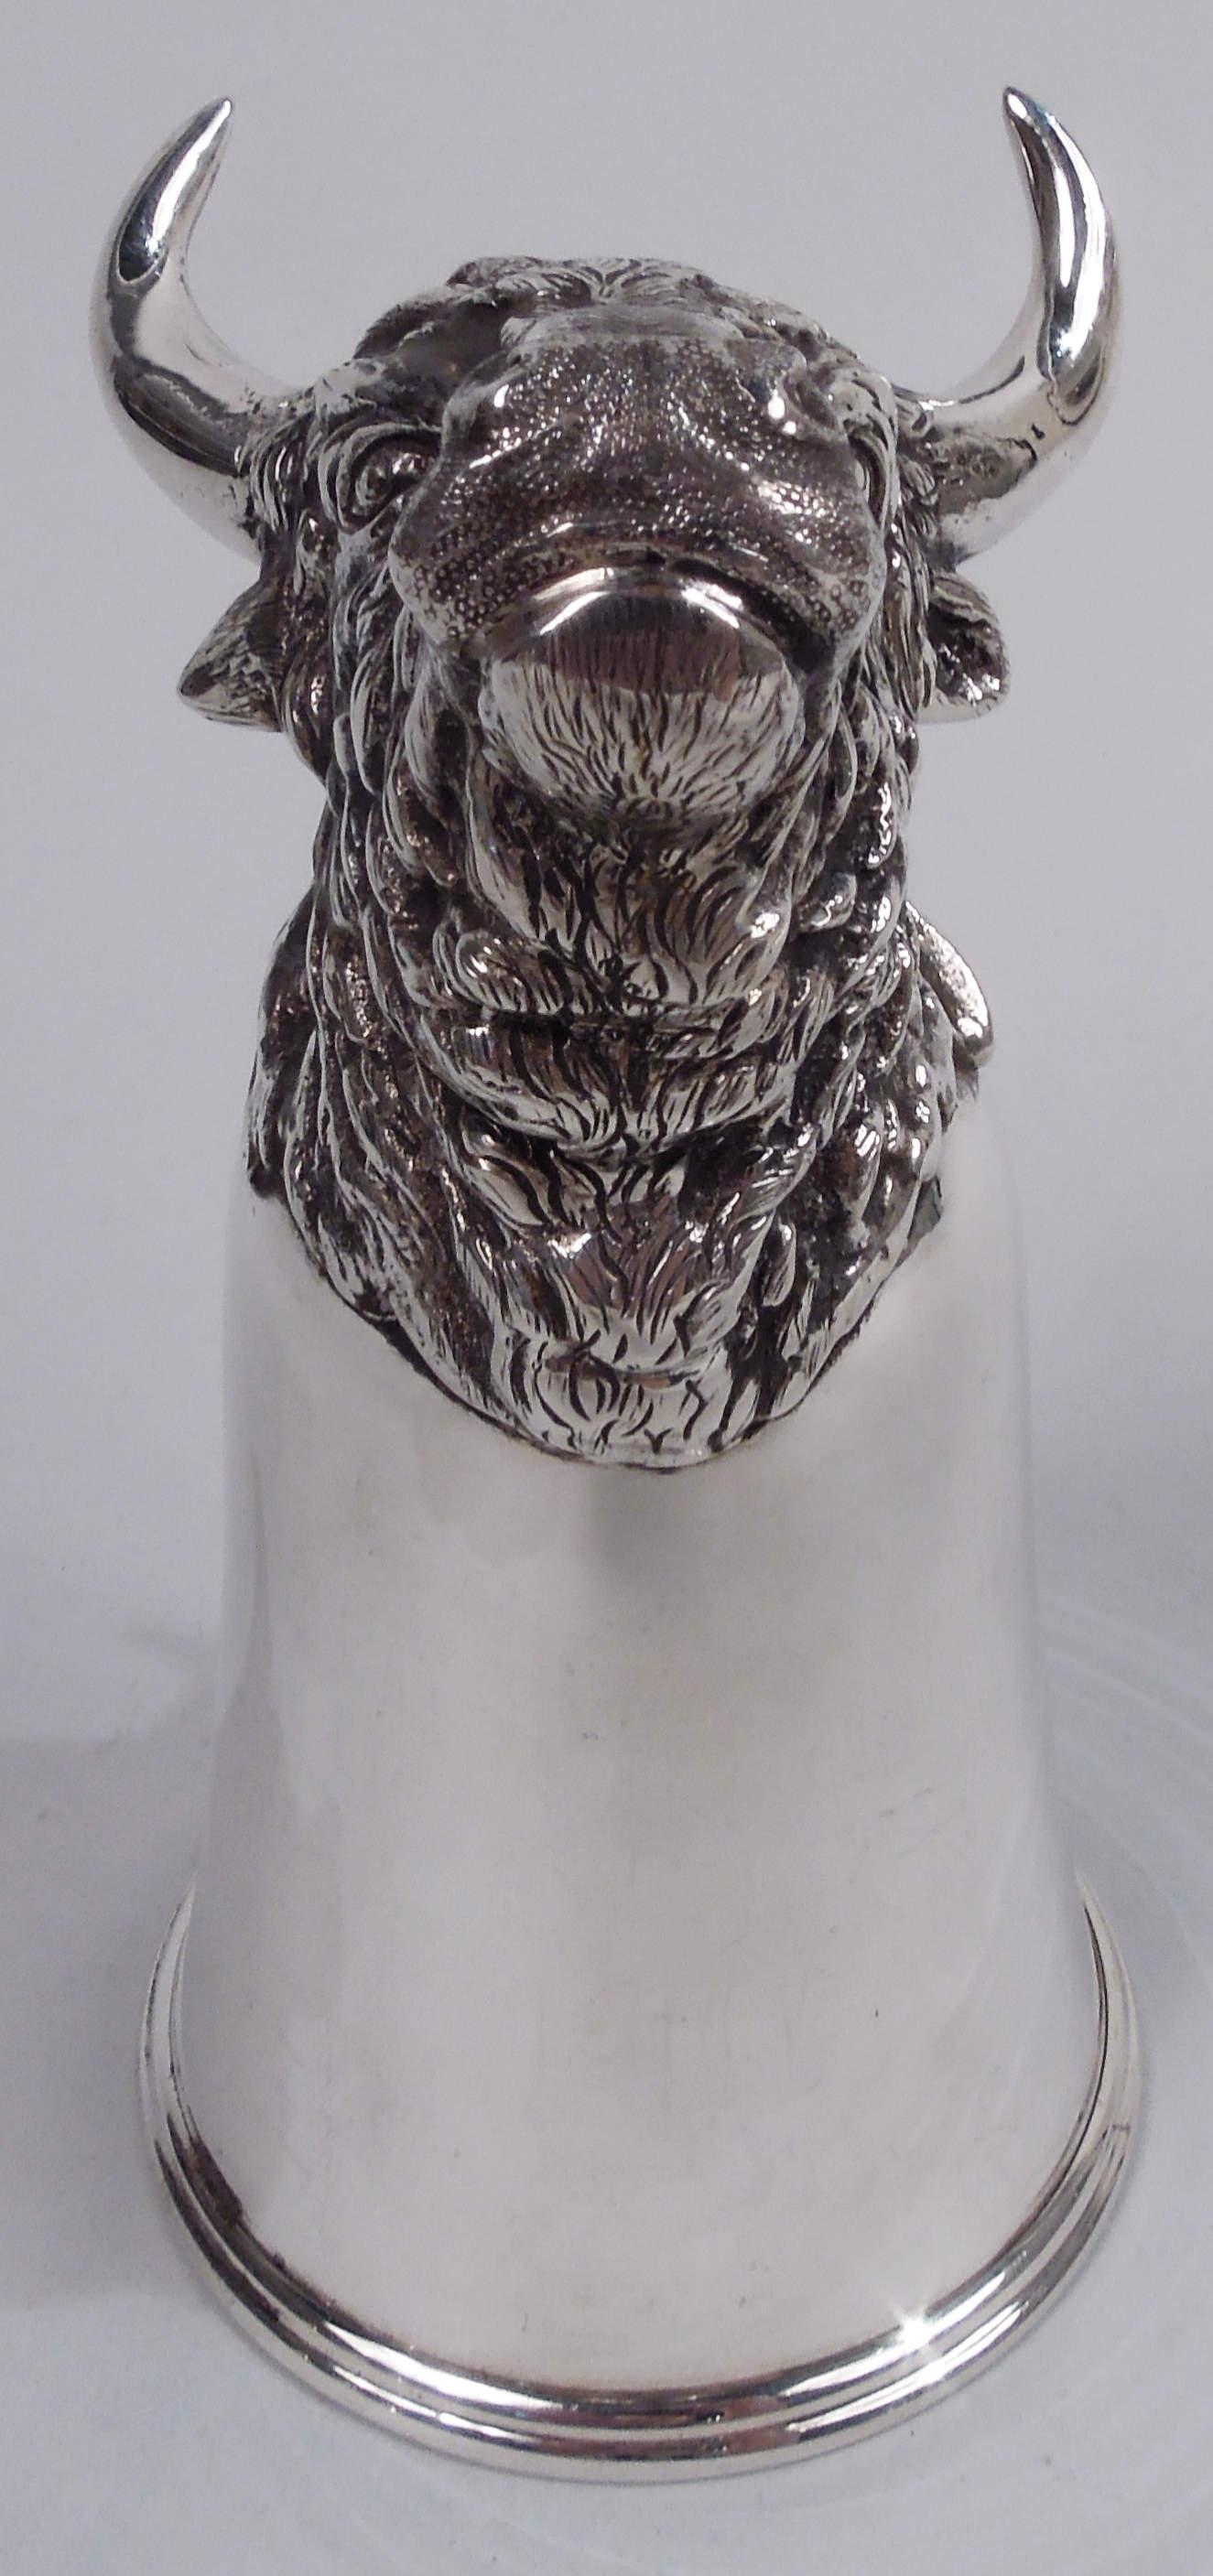 German 800 silver stirrup cup, ca 1910. Plain upward tapering bowl with molded rim; cast mount in form of bull head with thick, matted fur and pointy flexed ears under sharp, oversized alpha horns. Firmly closed mouth and direct stare suggest a